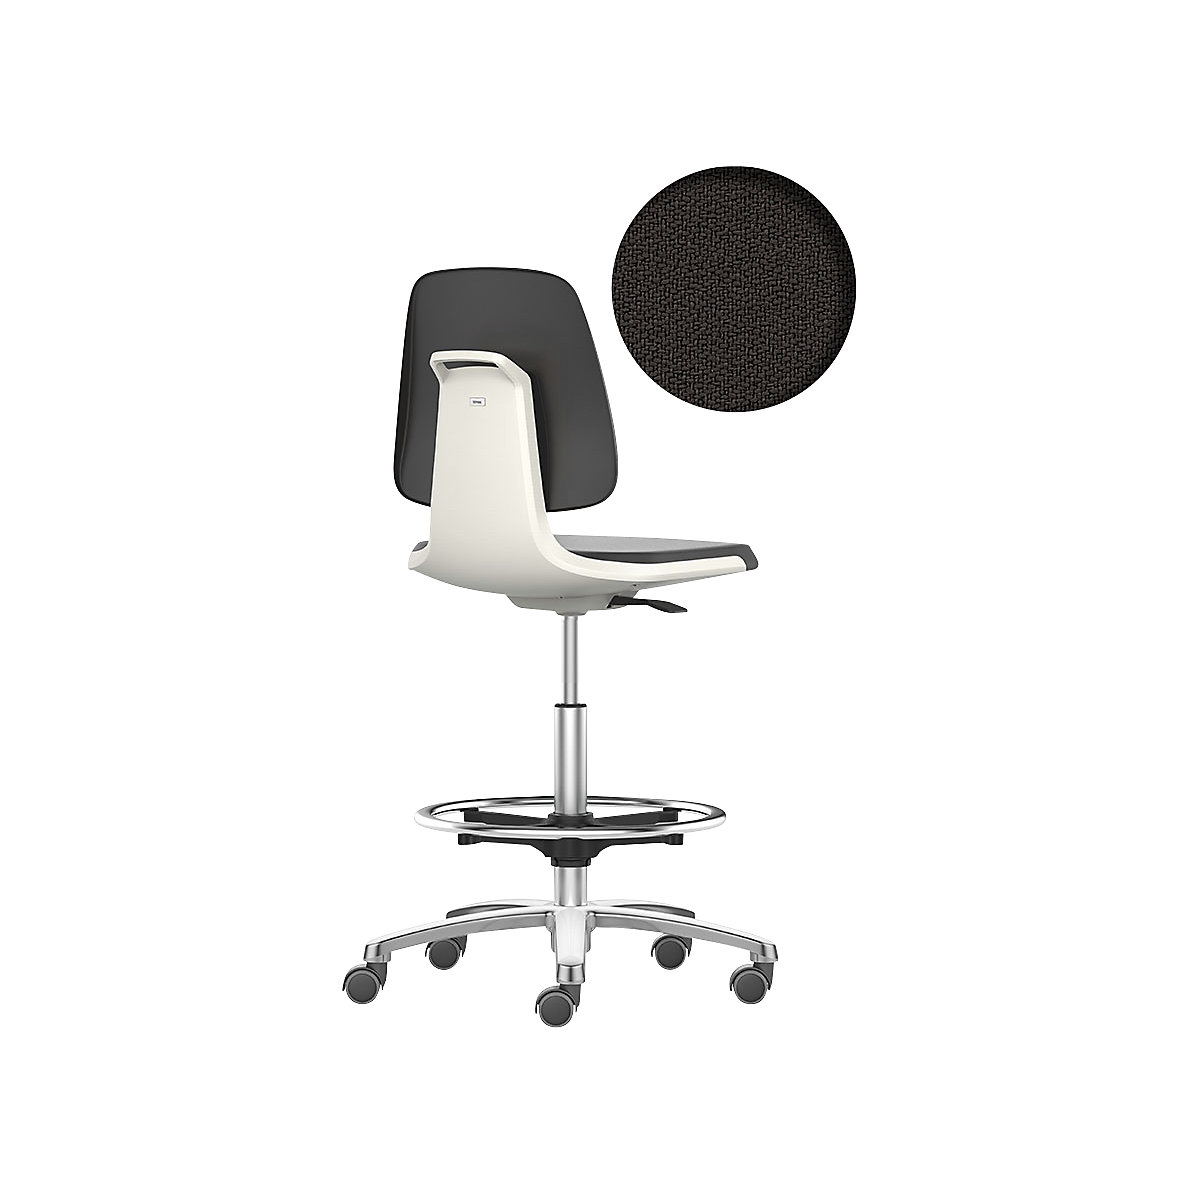 LABSIT industrial swivel chair – bimos, high chair with sit-stop castors and foot ring, fabric upholstered seat, white-24